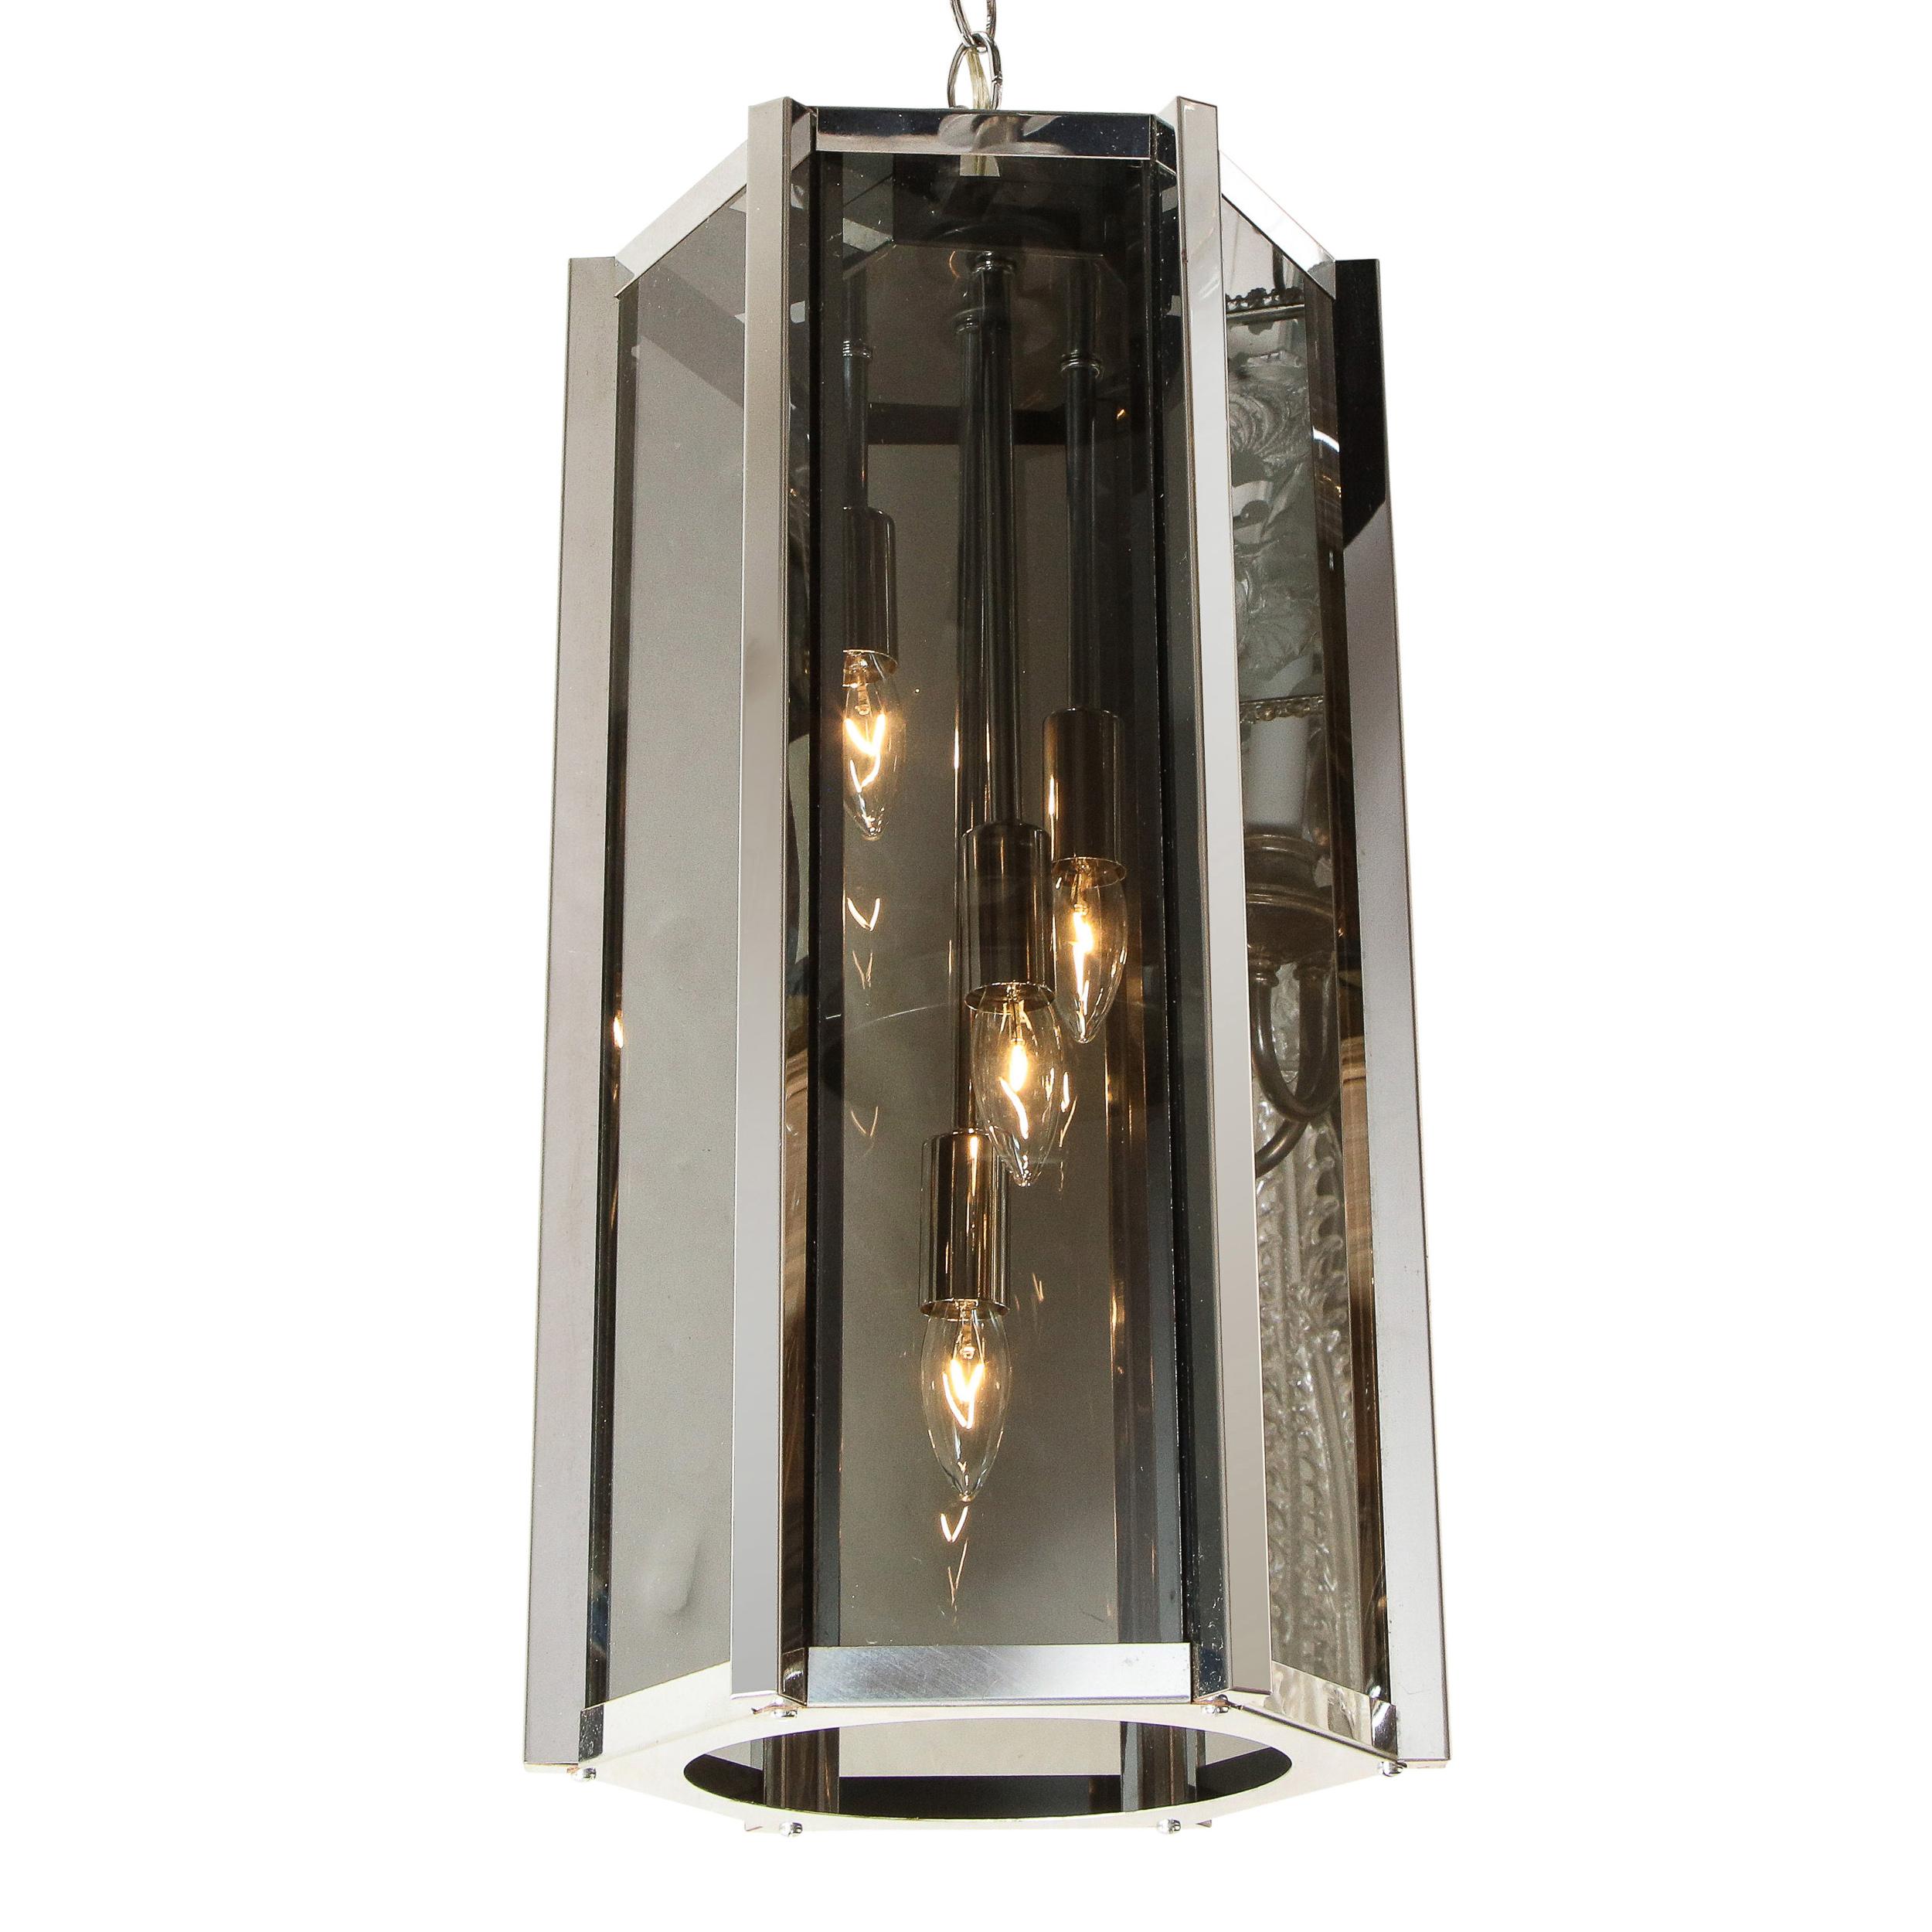 This refined Mid-Century Modern lantern chandelier was realized in the United States, circa 1970. It features a hexagonal body with smoked glass rectangular panels supported by a lustrous chrome frame. With its bold silhouette, clean lines and